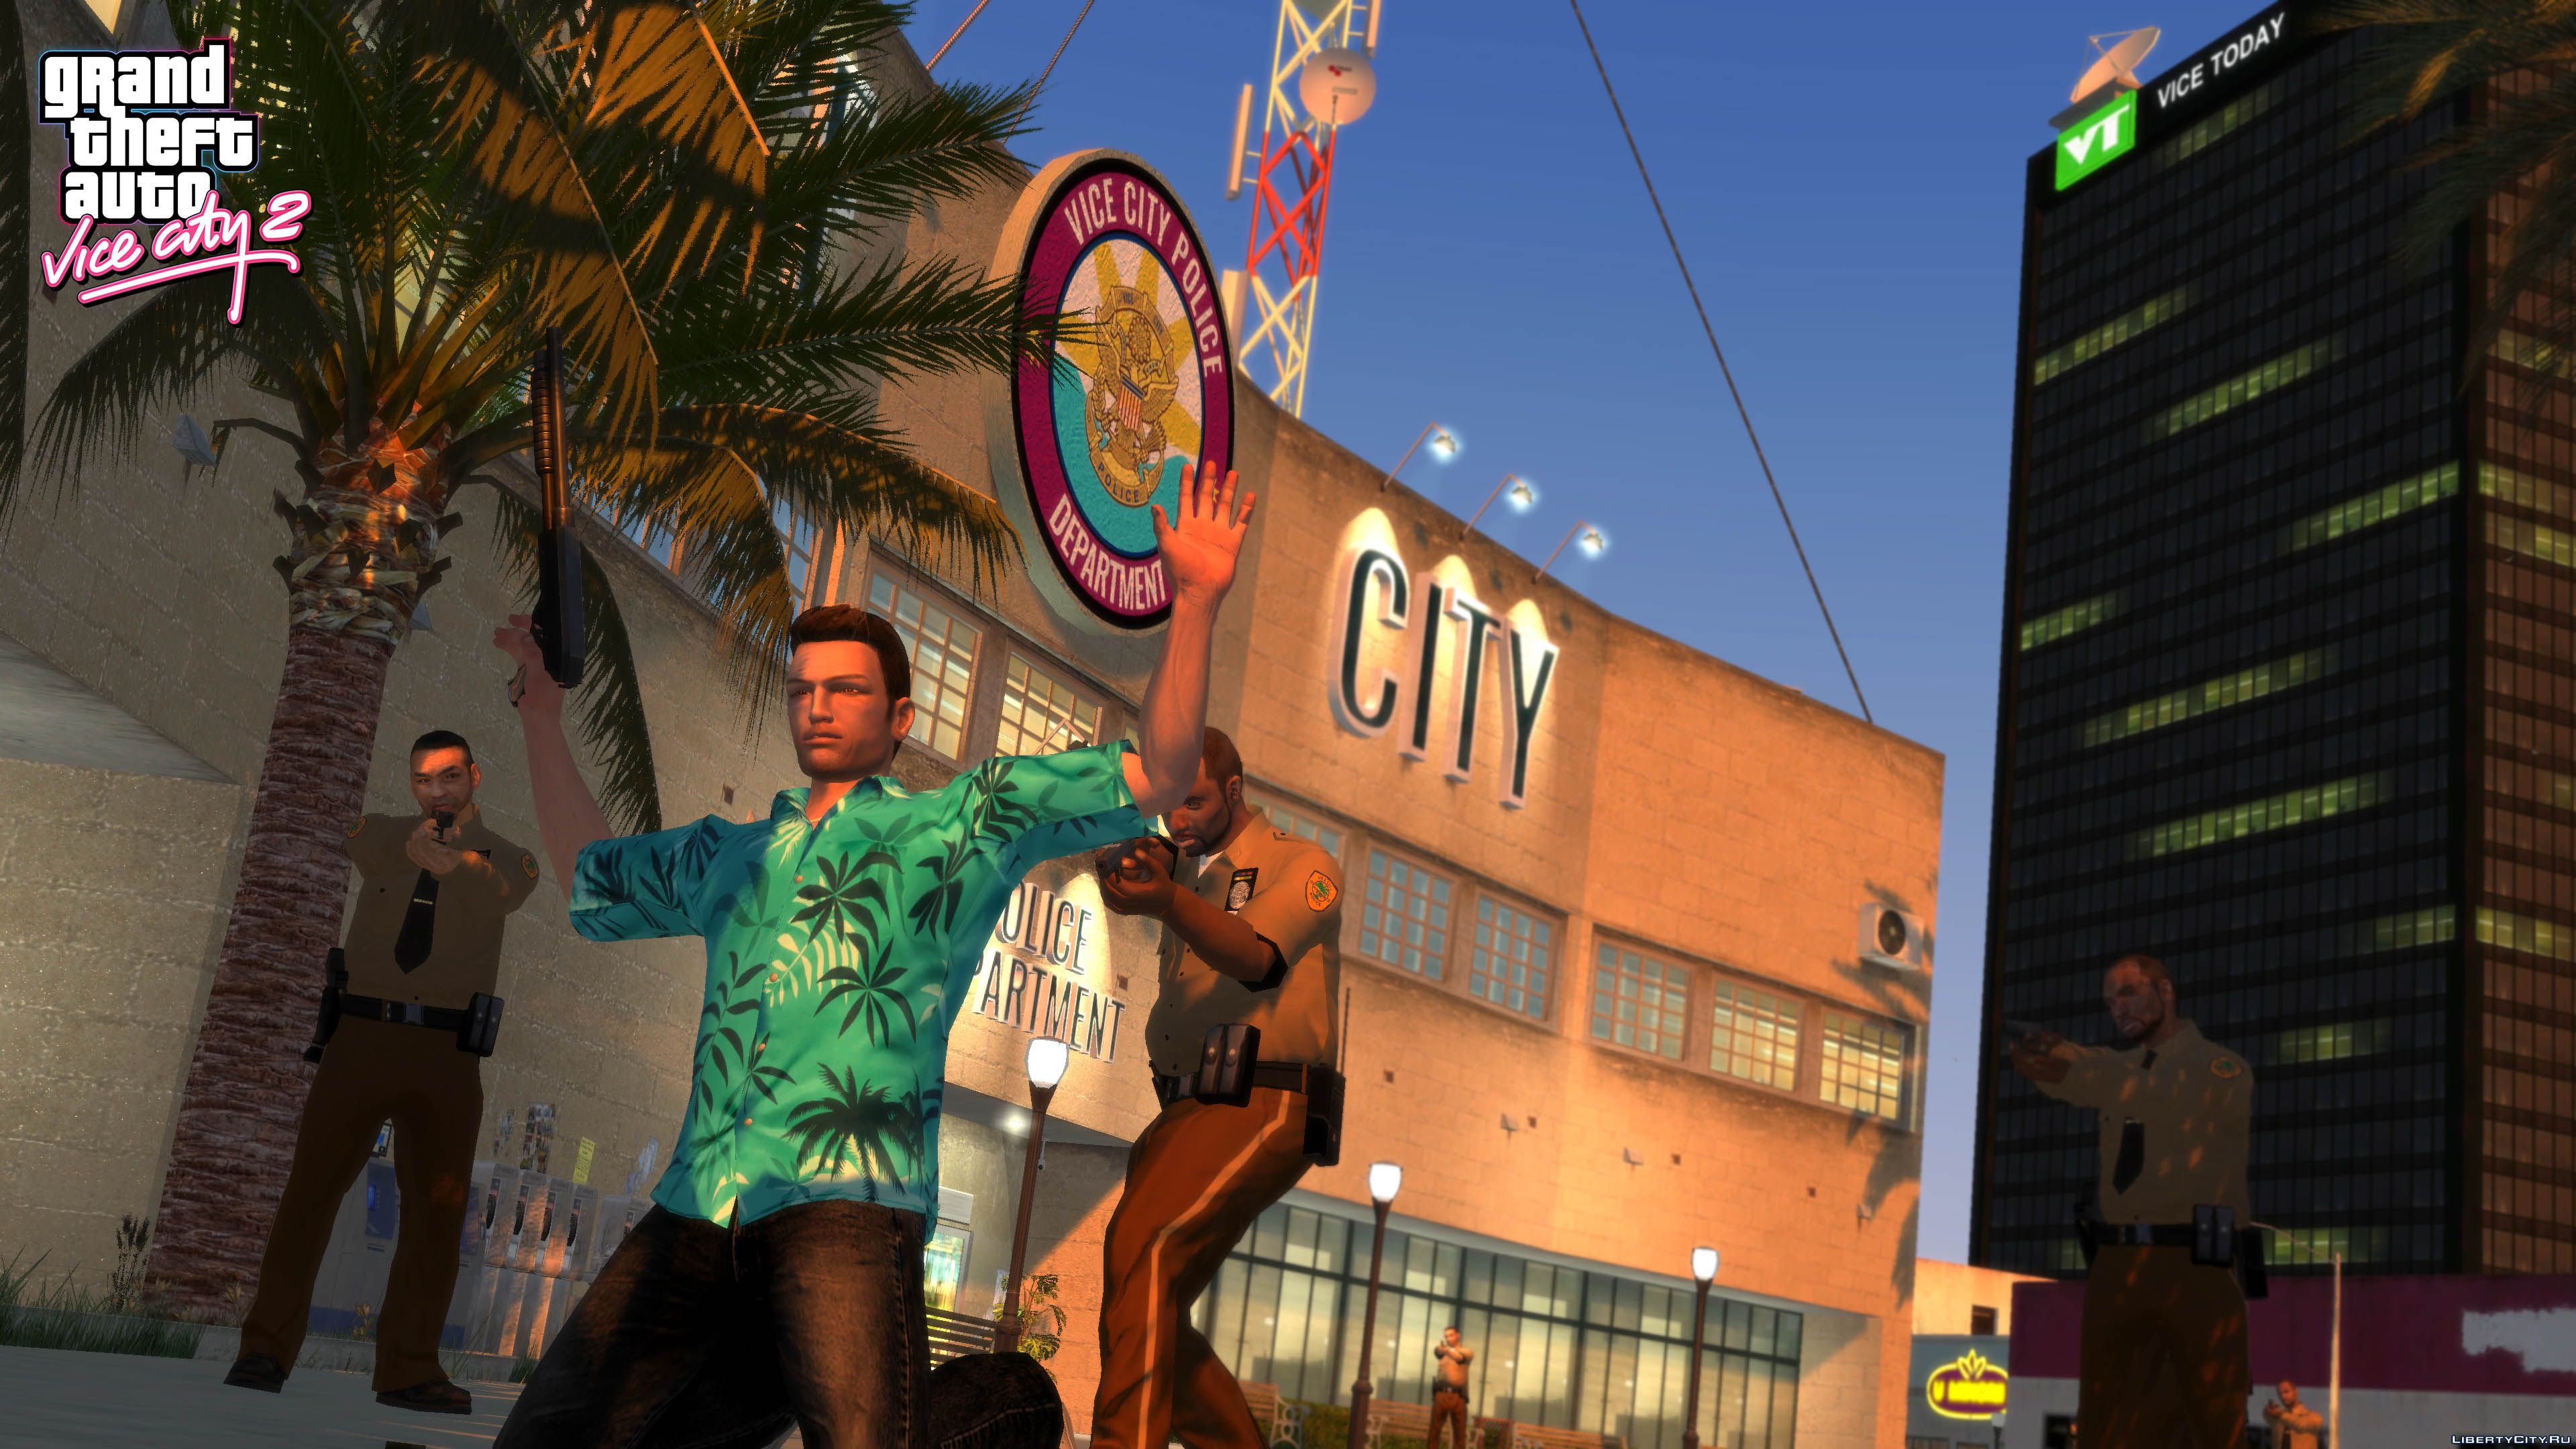 Grand Theft Auto: Vice City - 20 Years Later 